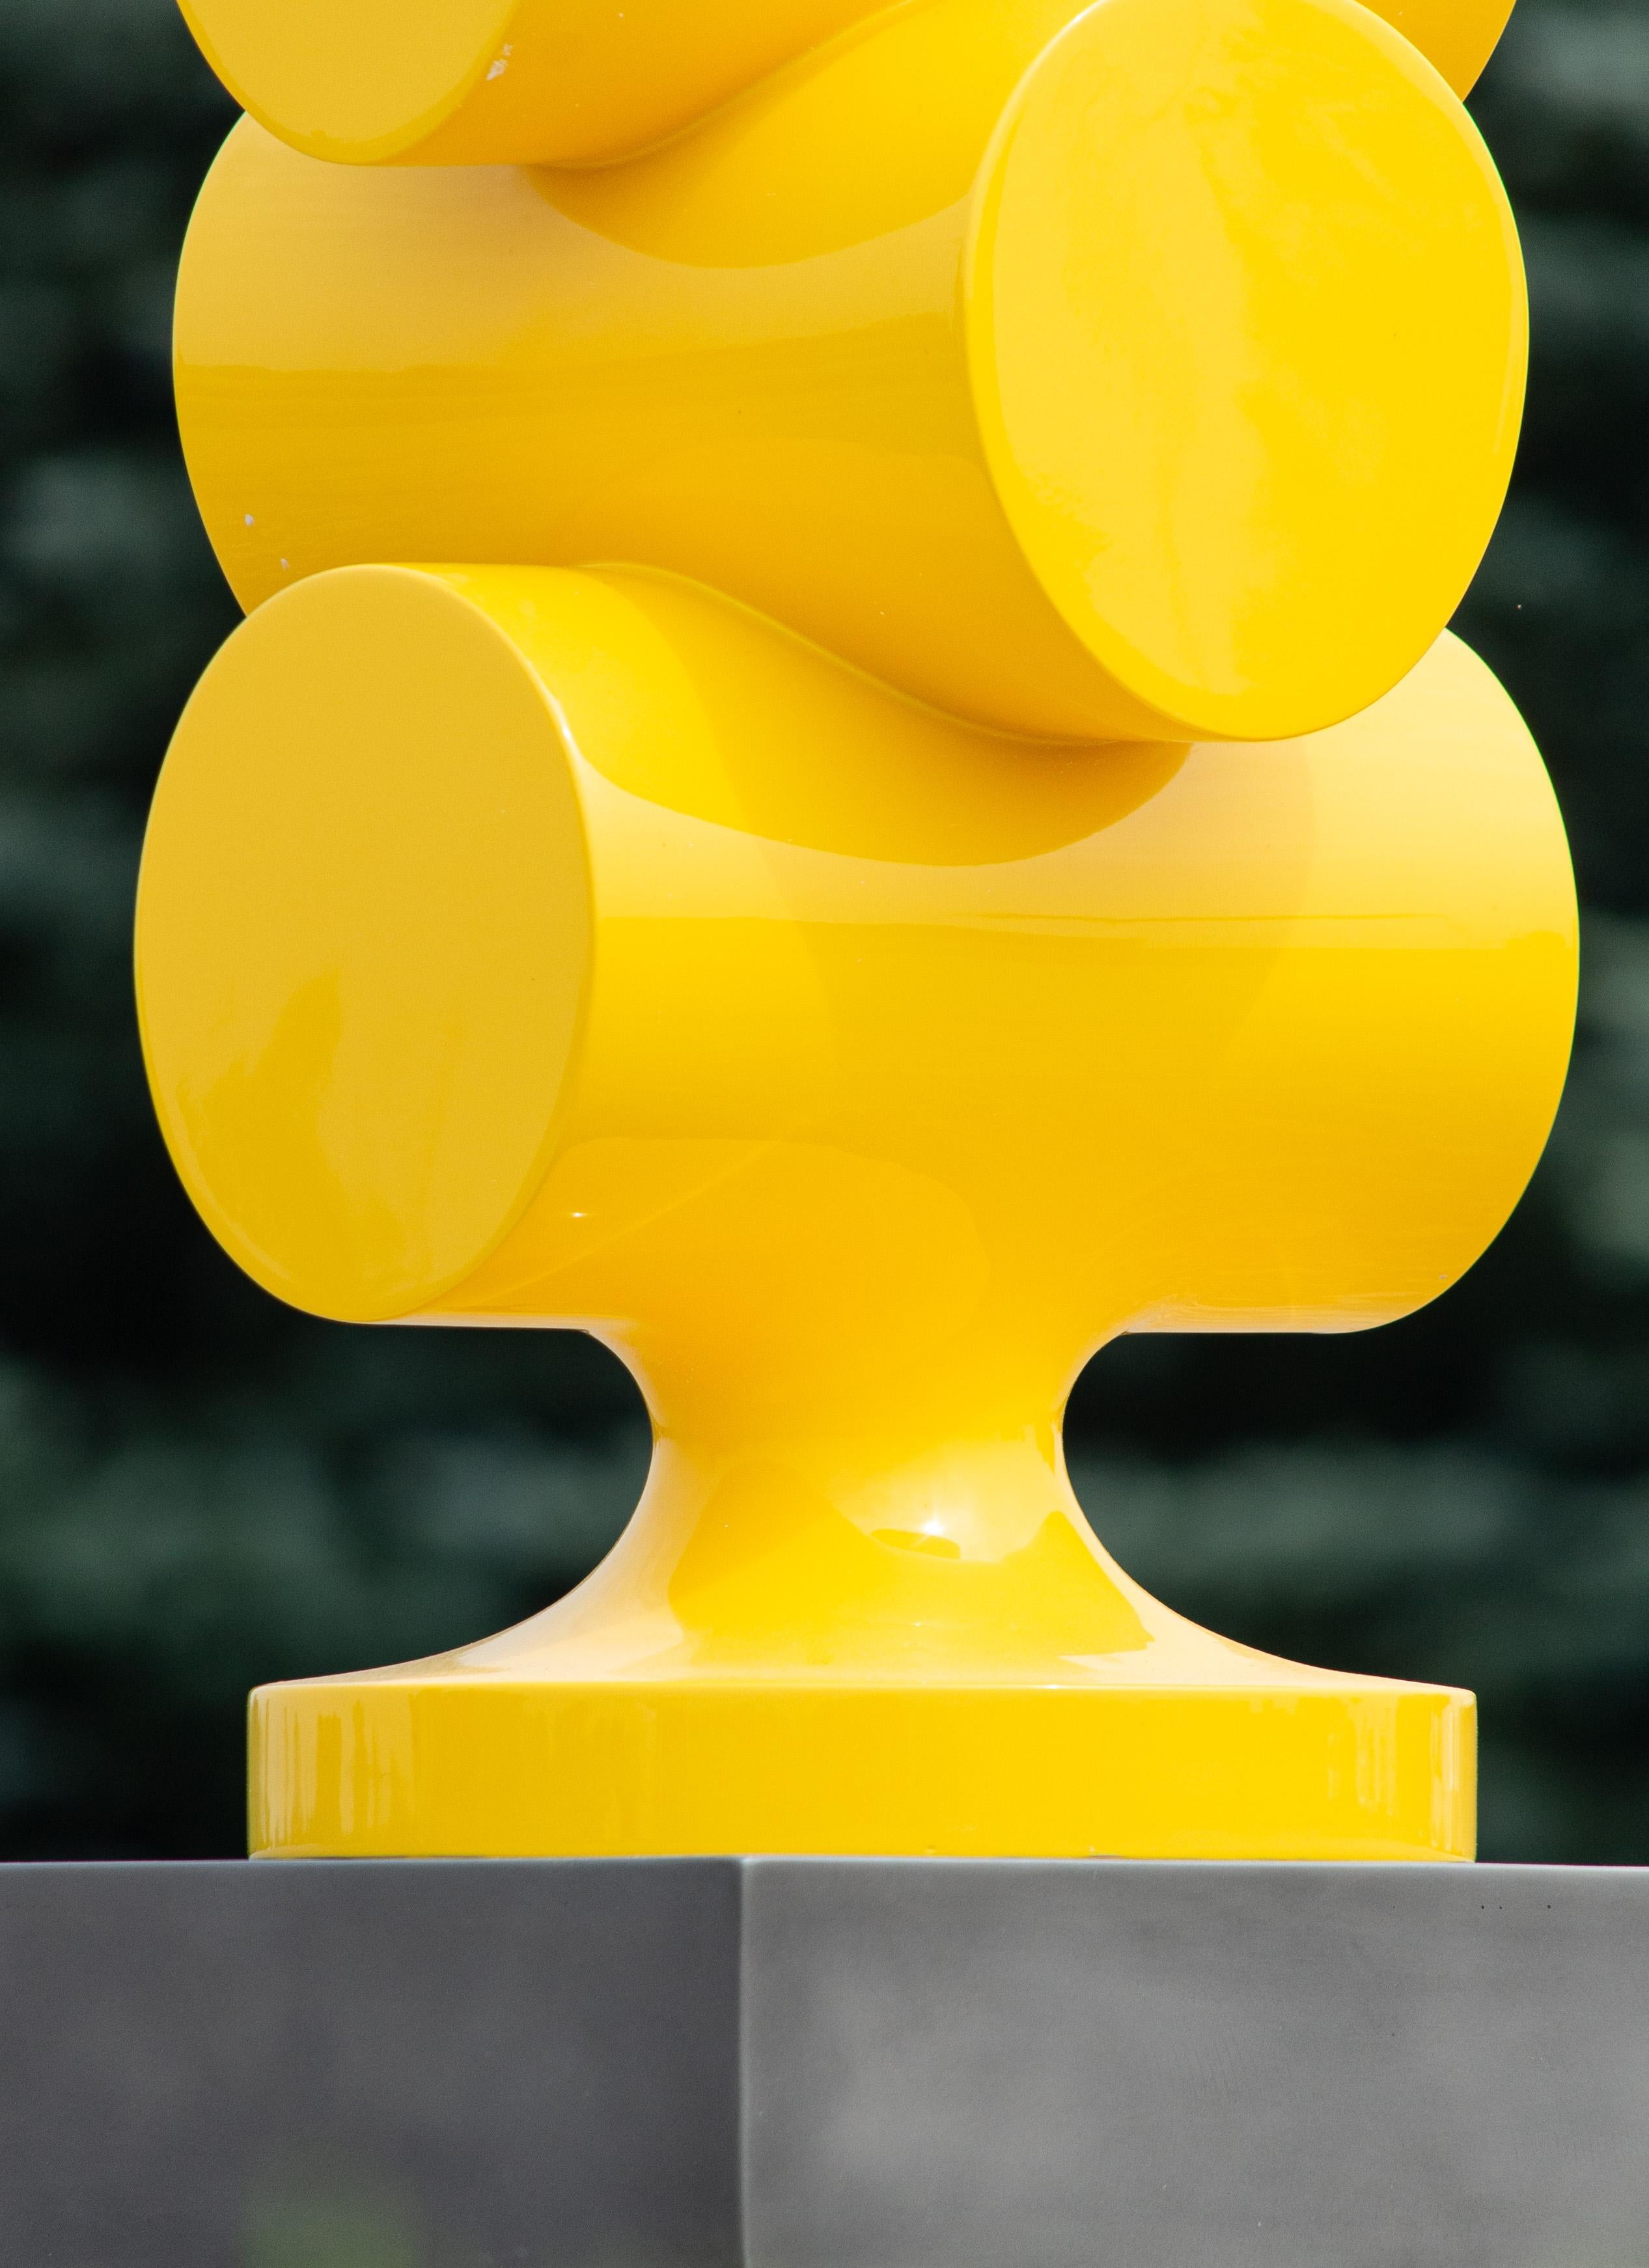 In eye-catching bright yellow, minimalism meets pop art in this playful sculpture by Alexander Caldwell. The Alberta artist favours sculpting with metal, clean lines and a vivid palette. This piece—a ‘totem’ of stacked logs forged from stainless